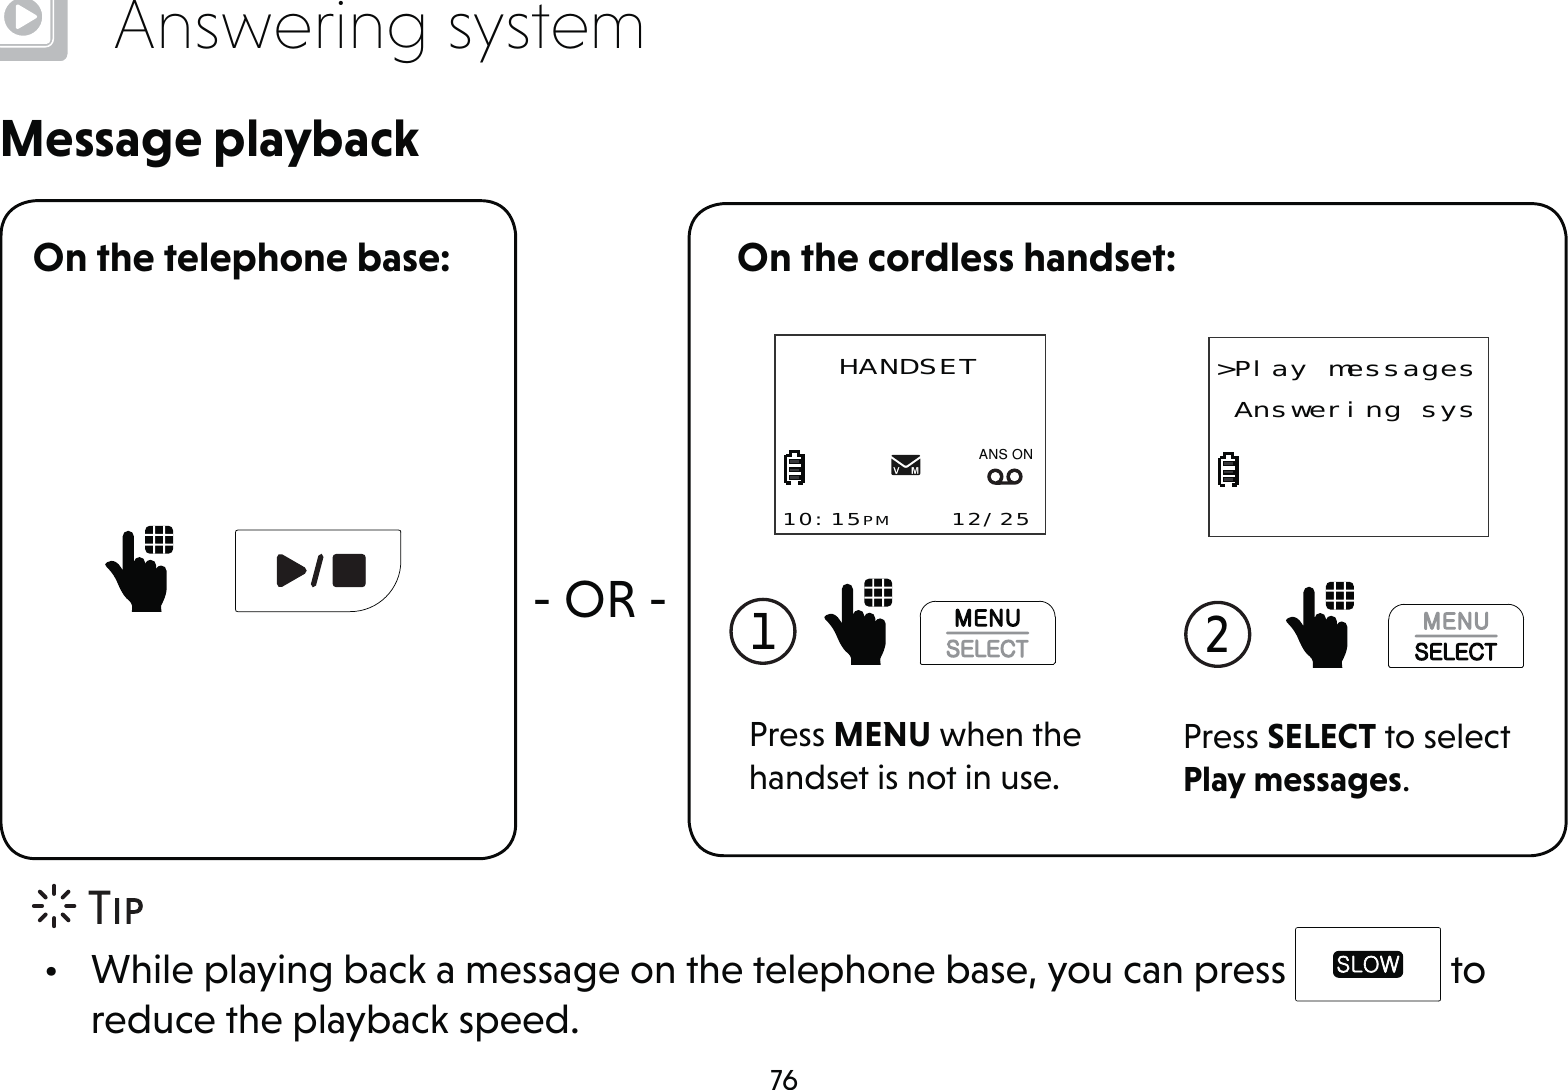 76Answering systemMessage playbackOn the telephone base:- OR -On the cordless handset:1 Press MENU when the handset is not in use.HANDSET10:15PM    12/25$1621Press SELECT to select Play messages.2 &gt;Play messages Answering sys•  While playing back a message on the telephone base, you can press   to reduce the playback speed.